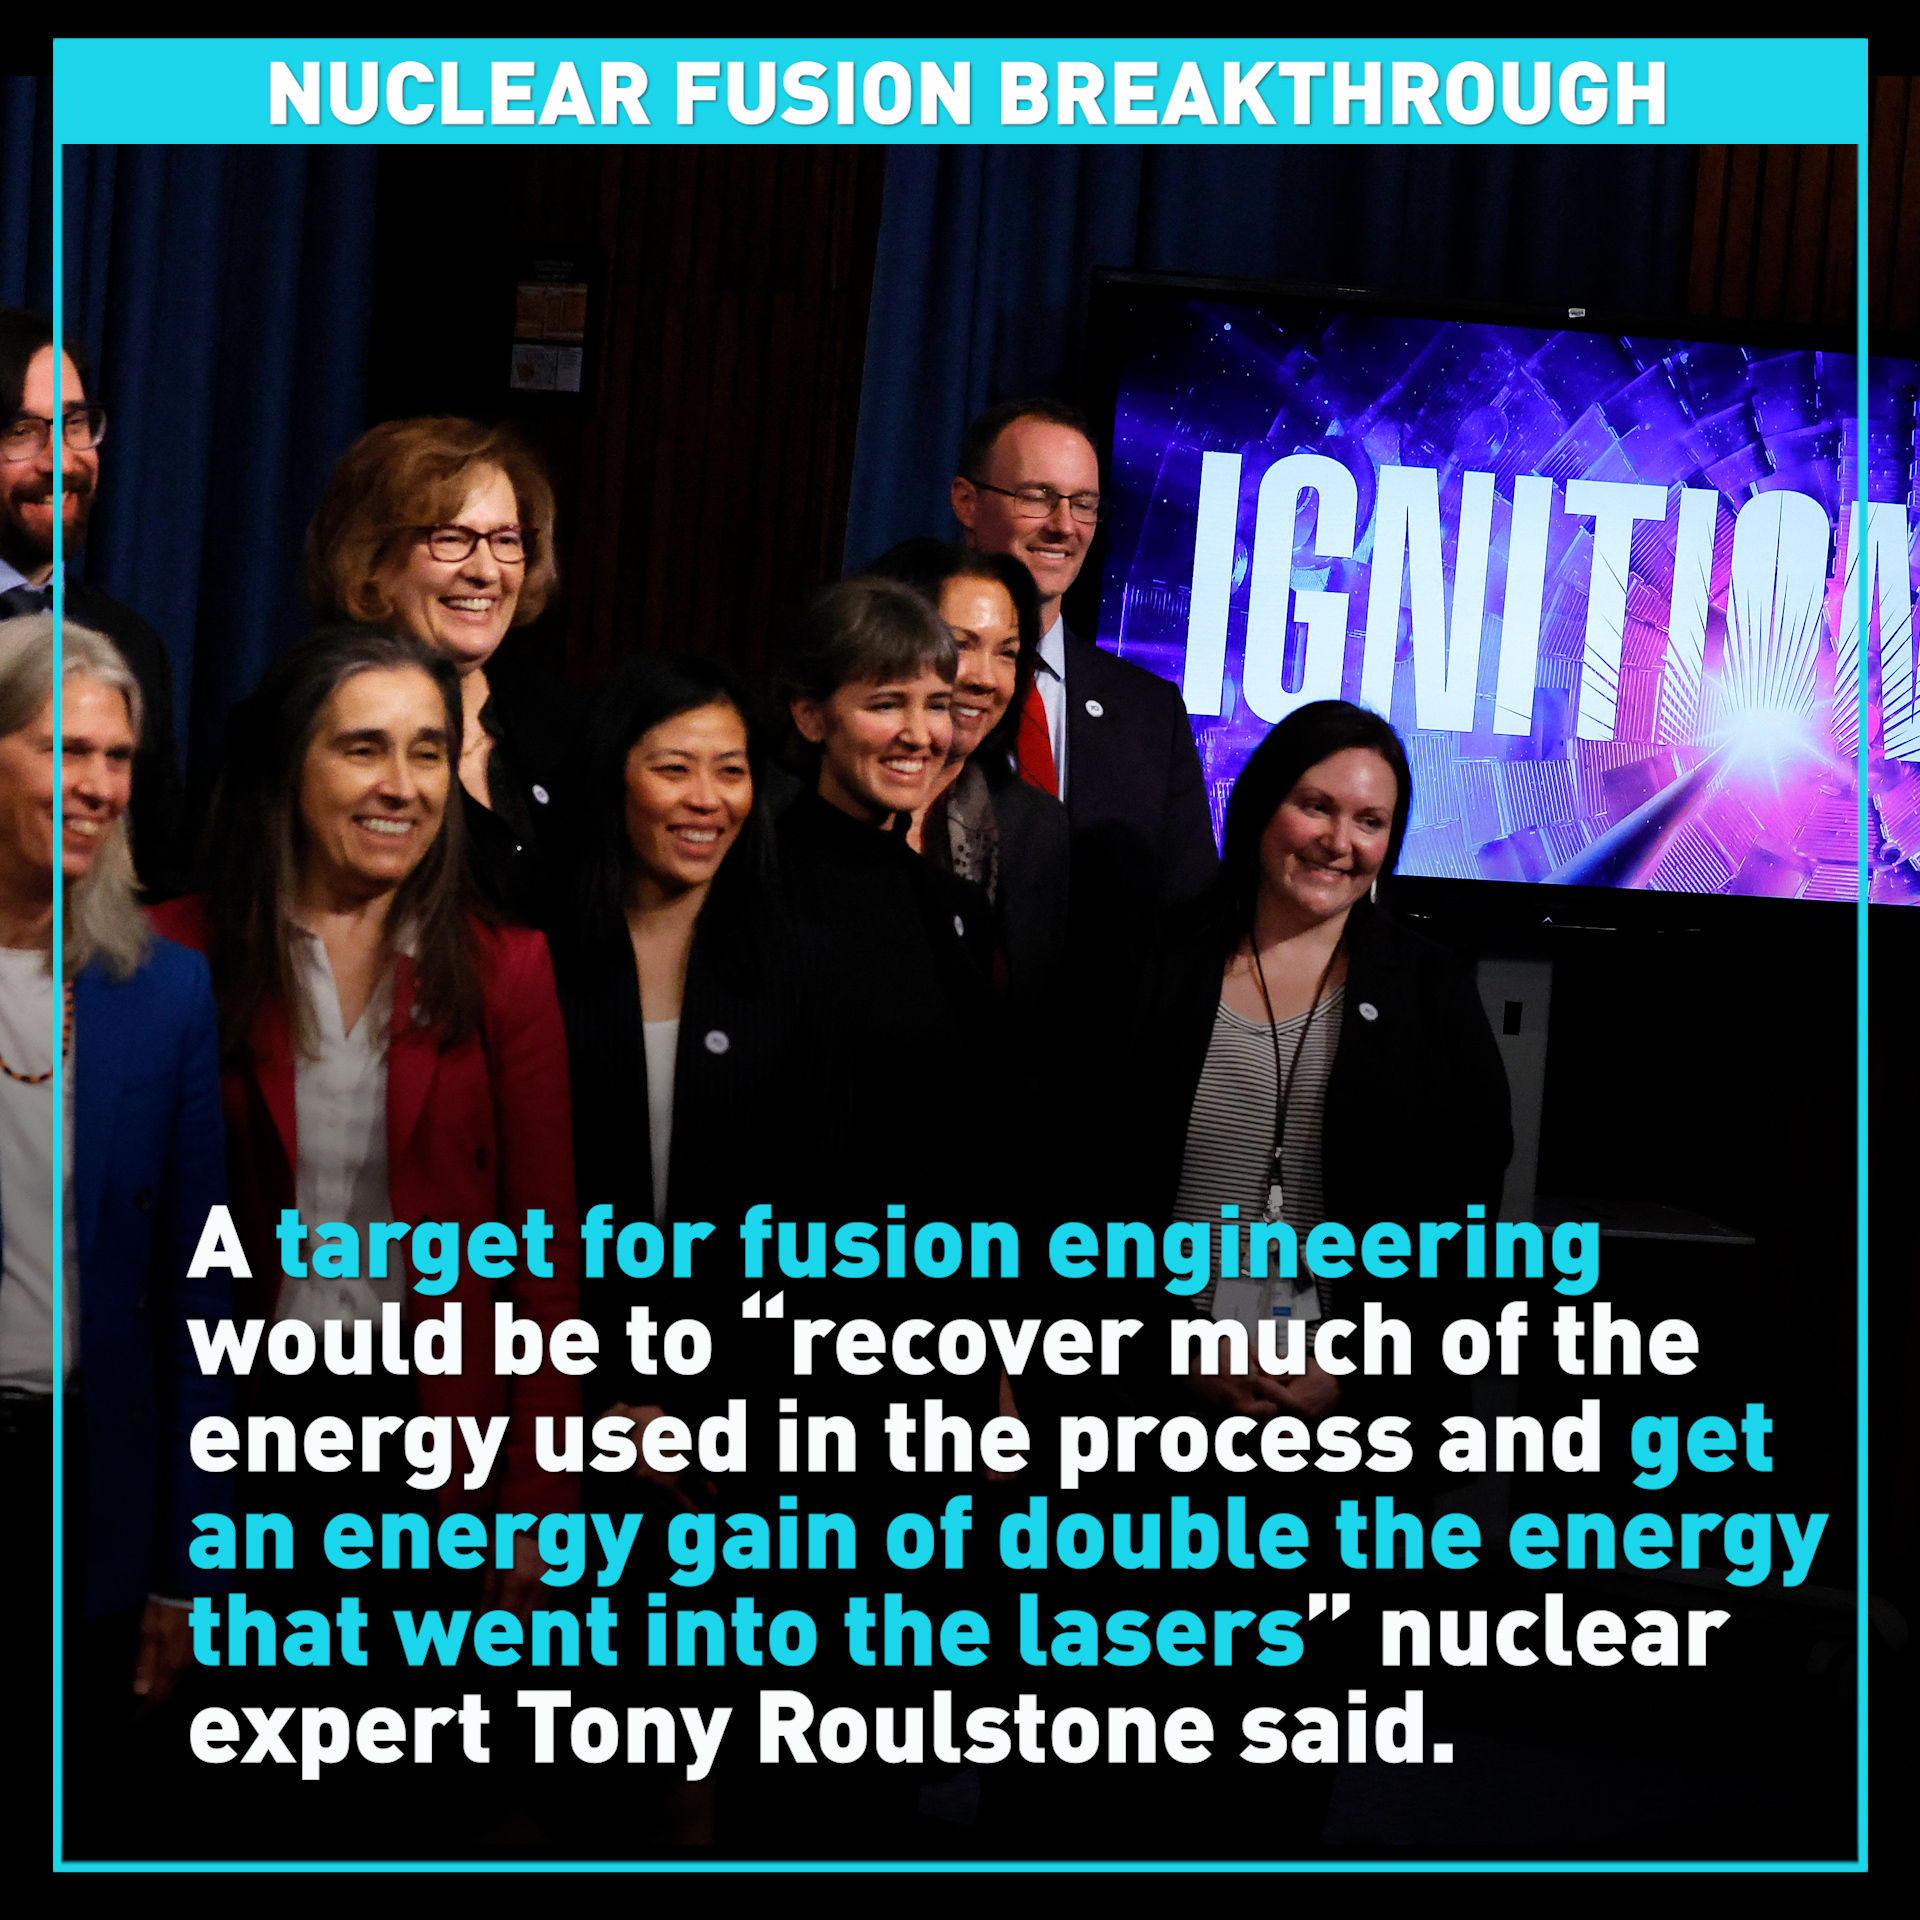 U.S. scientists make breakthrough in nuclear fusion